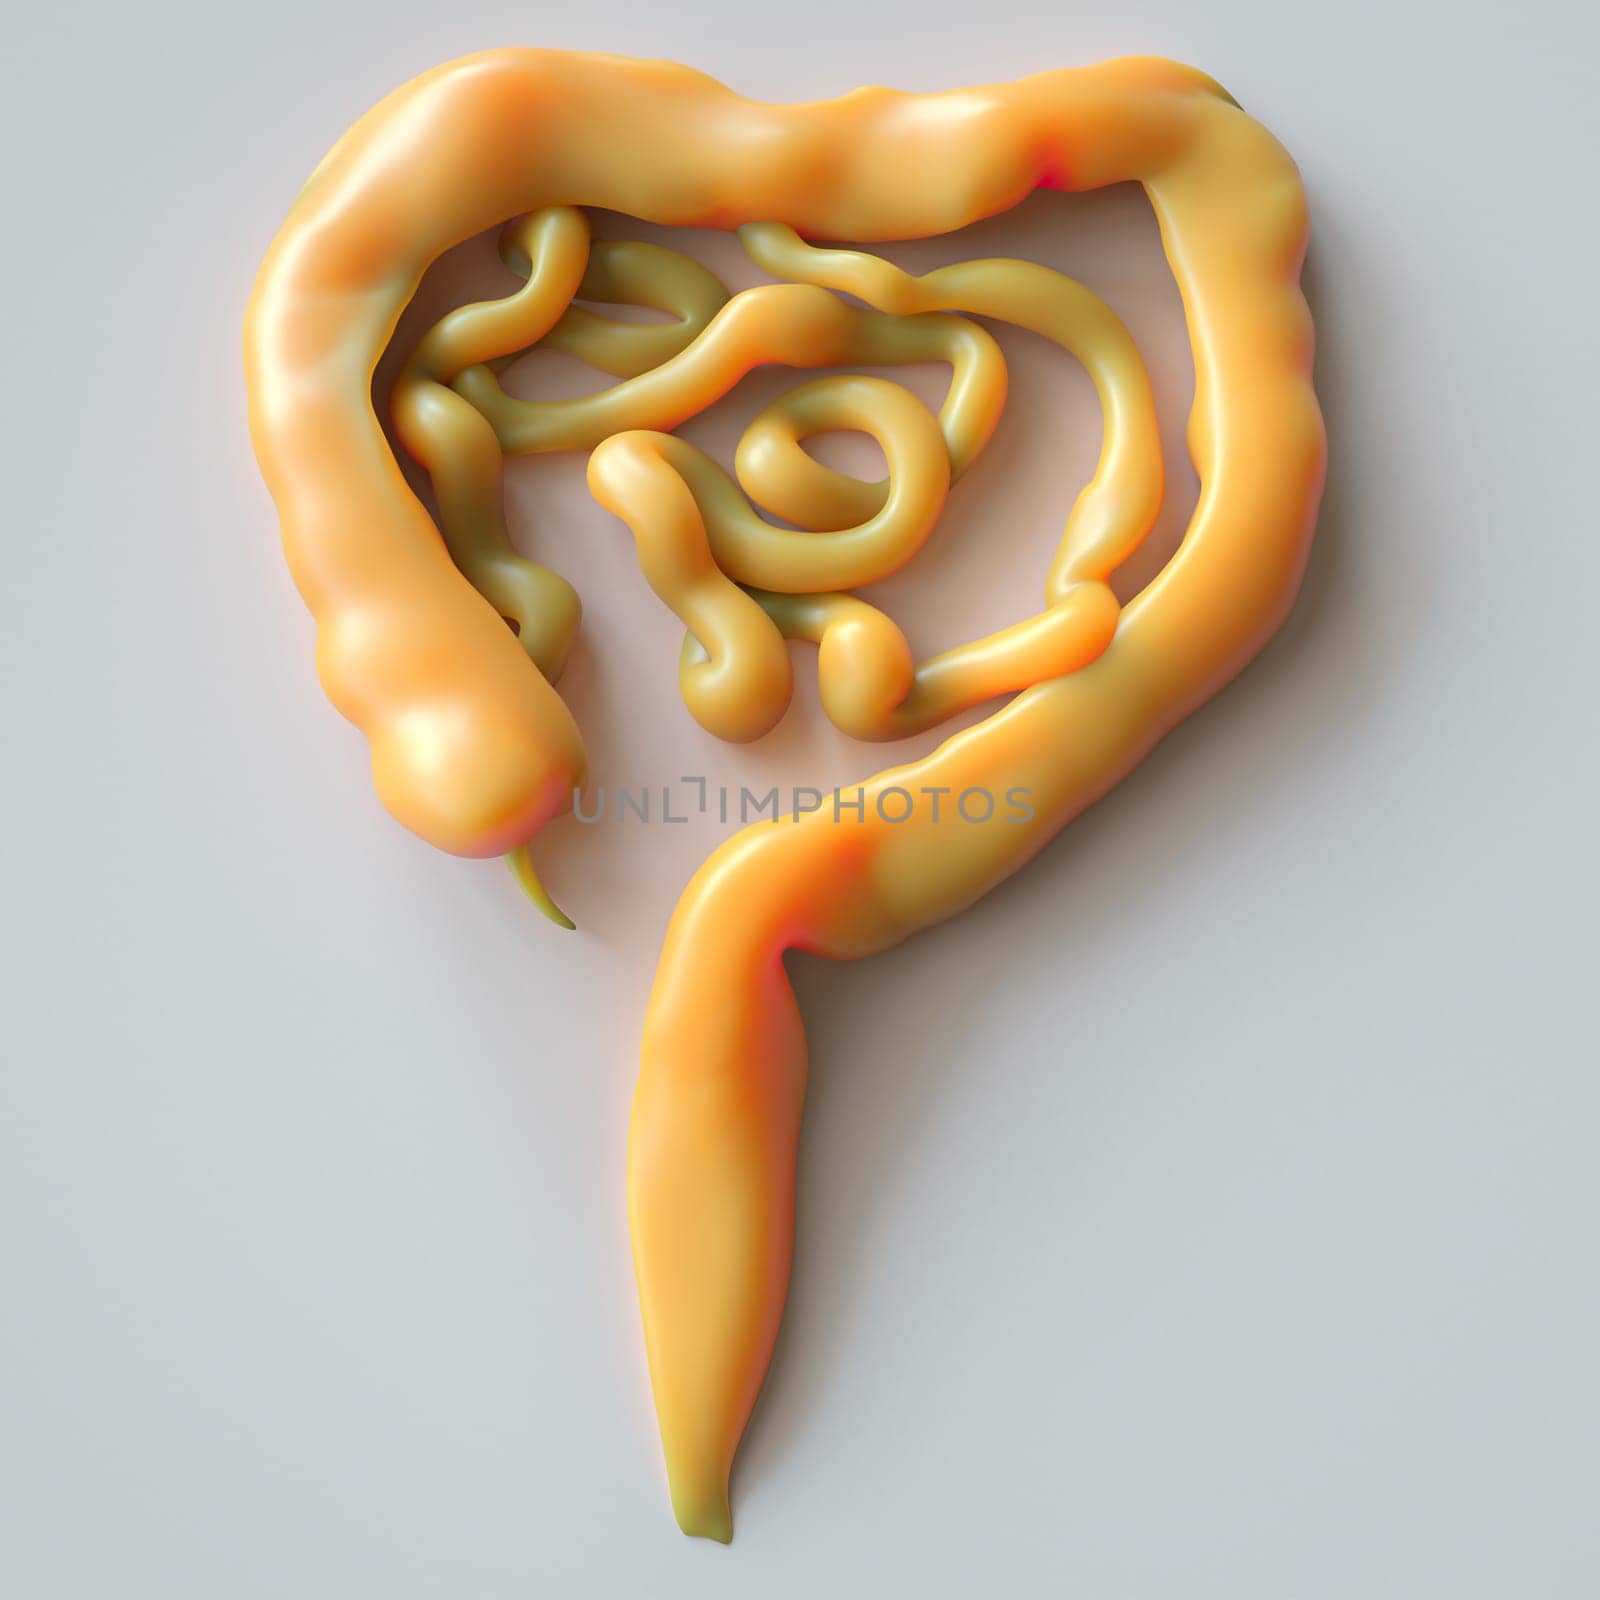 Stylized intestines depicted in yellow and red, suggesting inflammation, against a clean white backdrop.